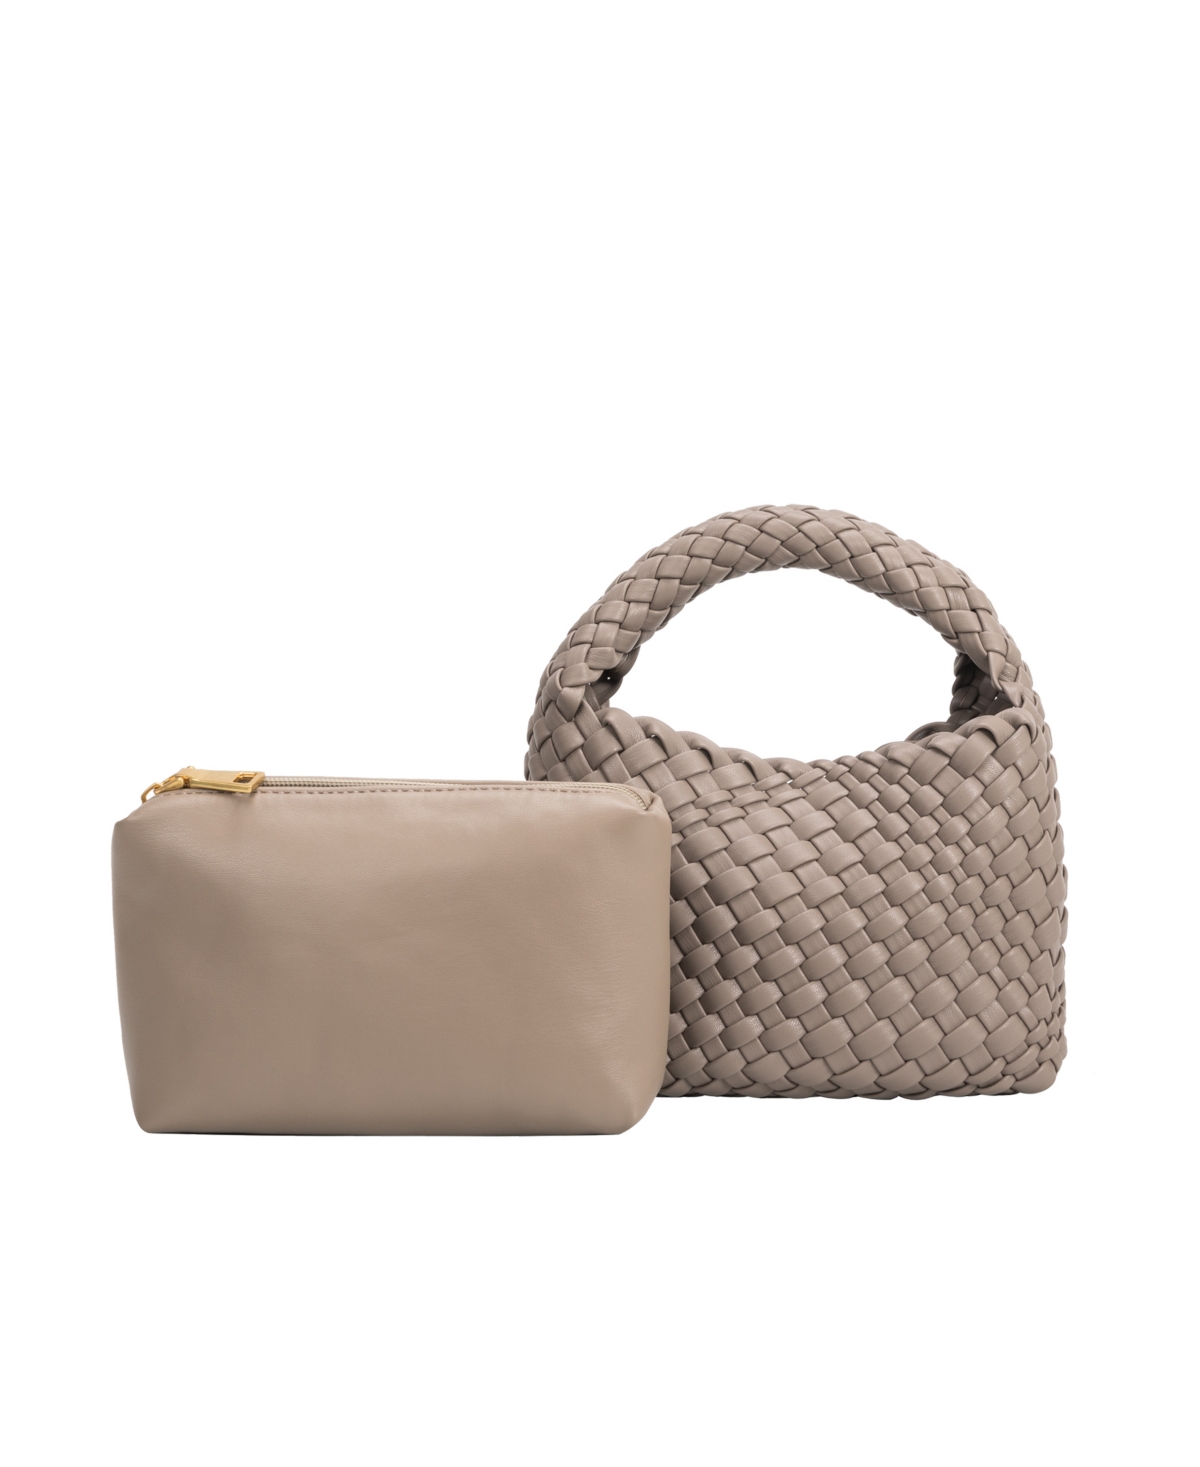 Melie Bianco Women's Sylvie Tote Bag In Taupe